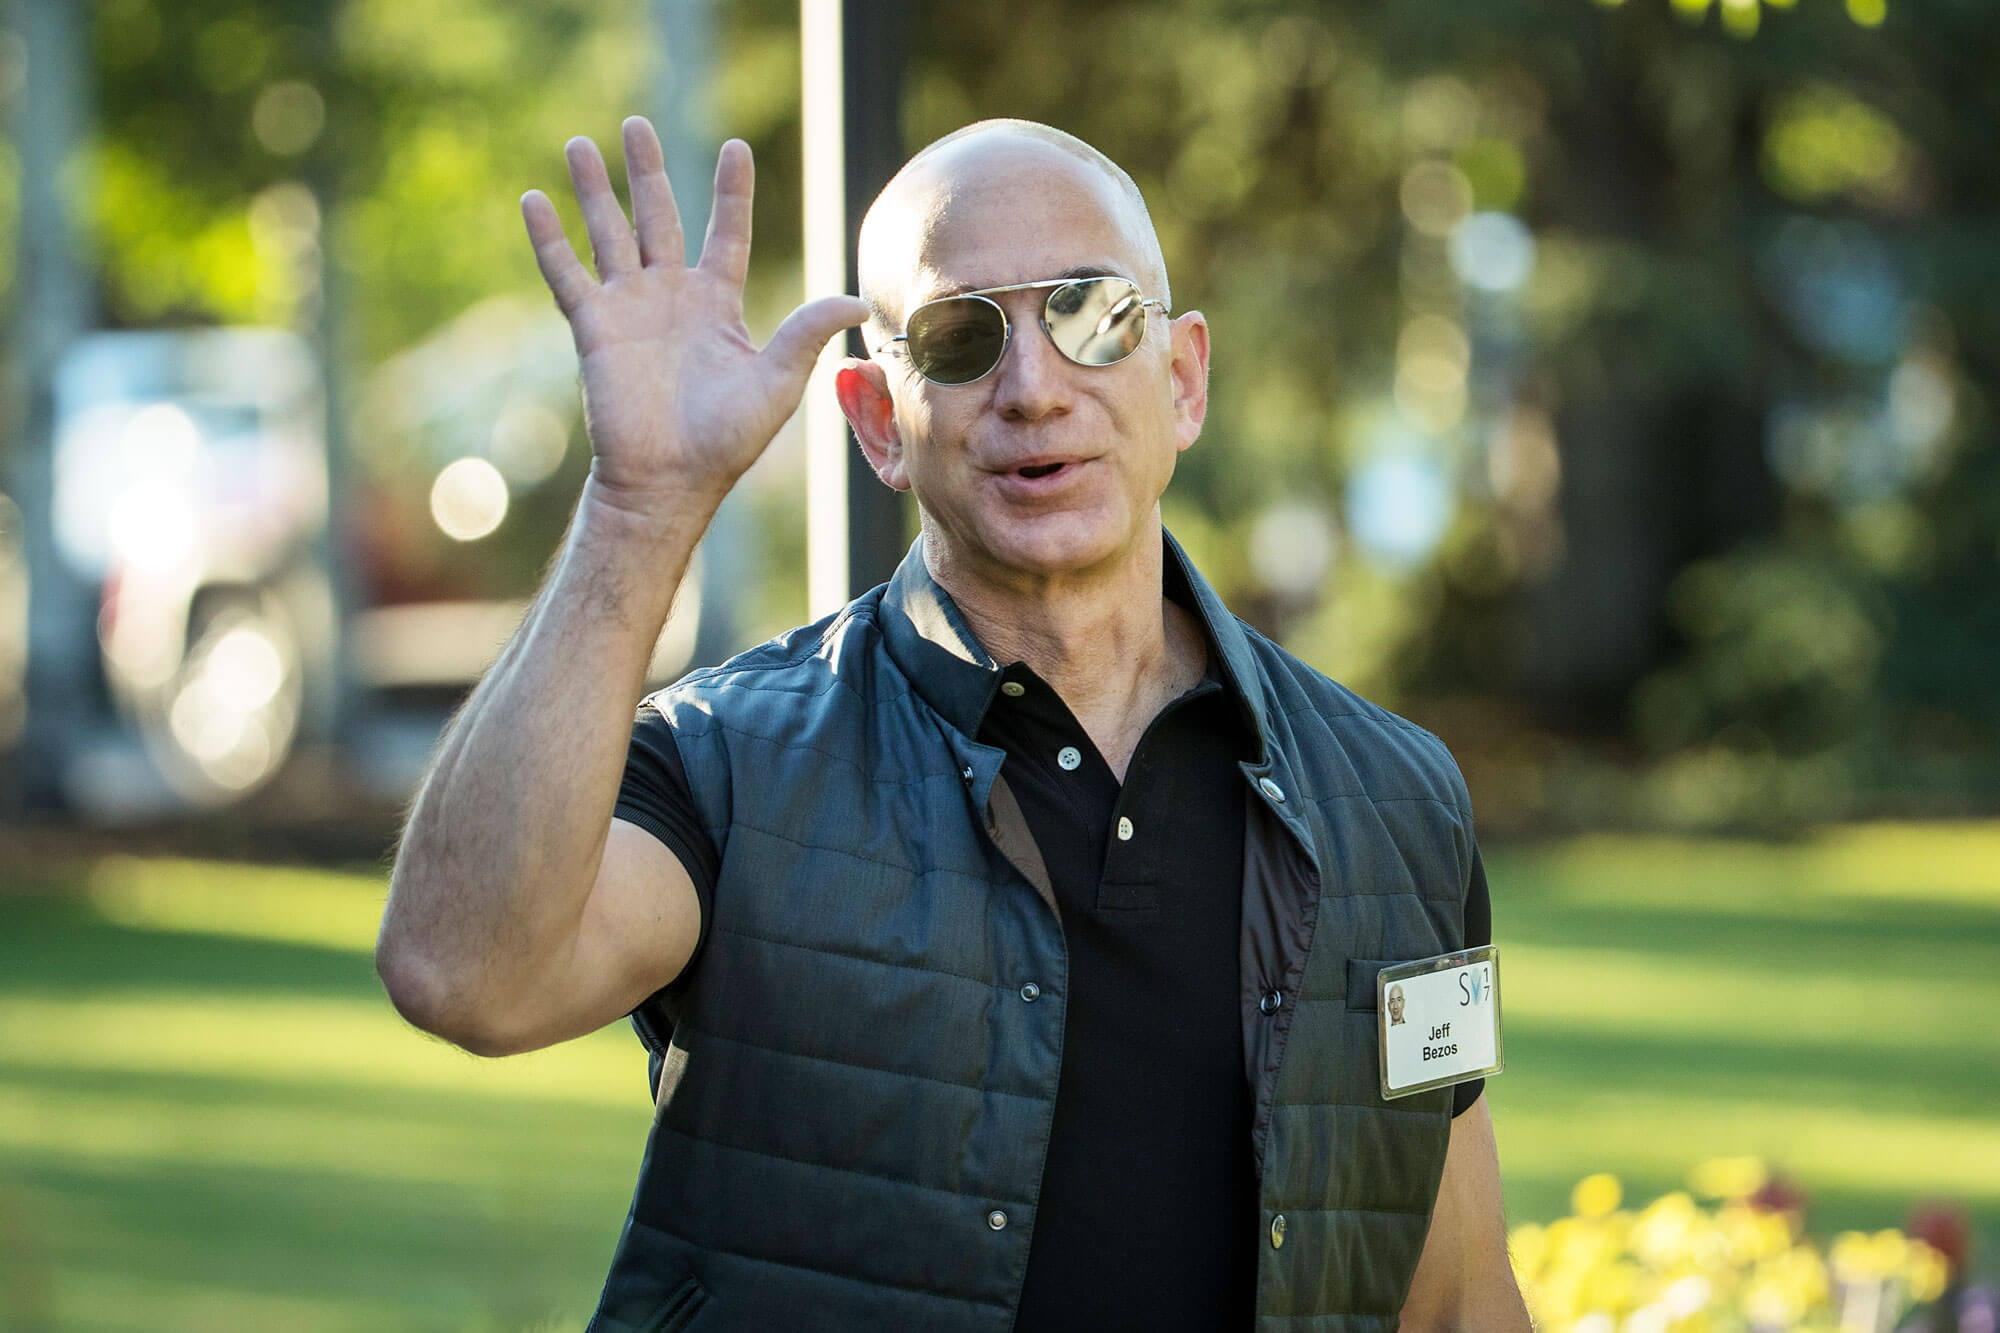 Jeff Bezos says the National Enquirer is blackmailing him over nude photos